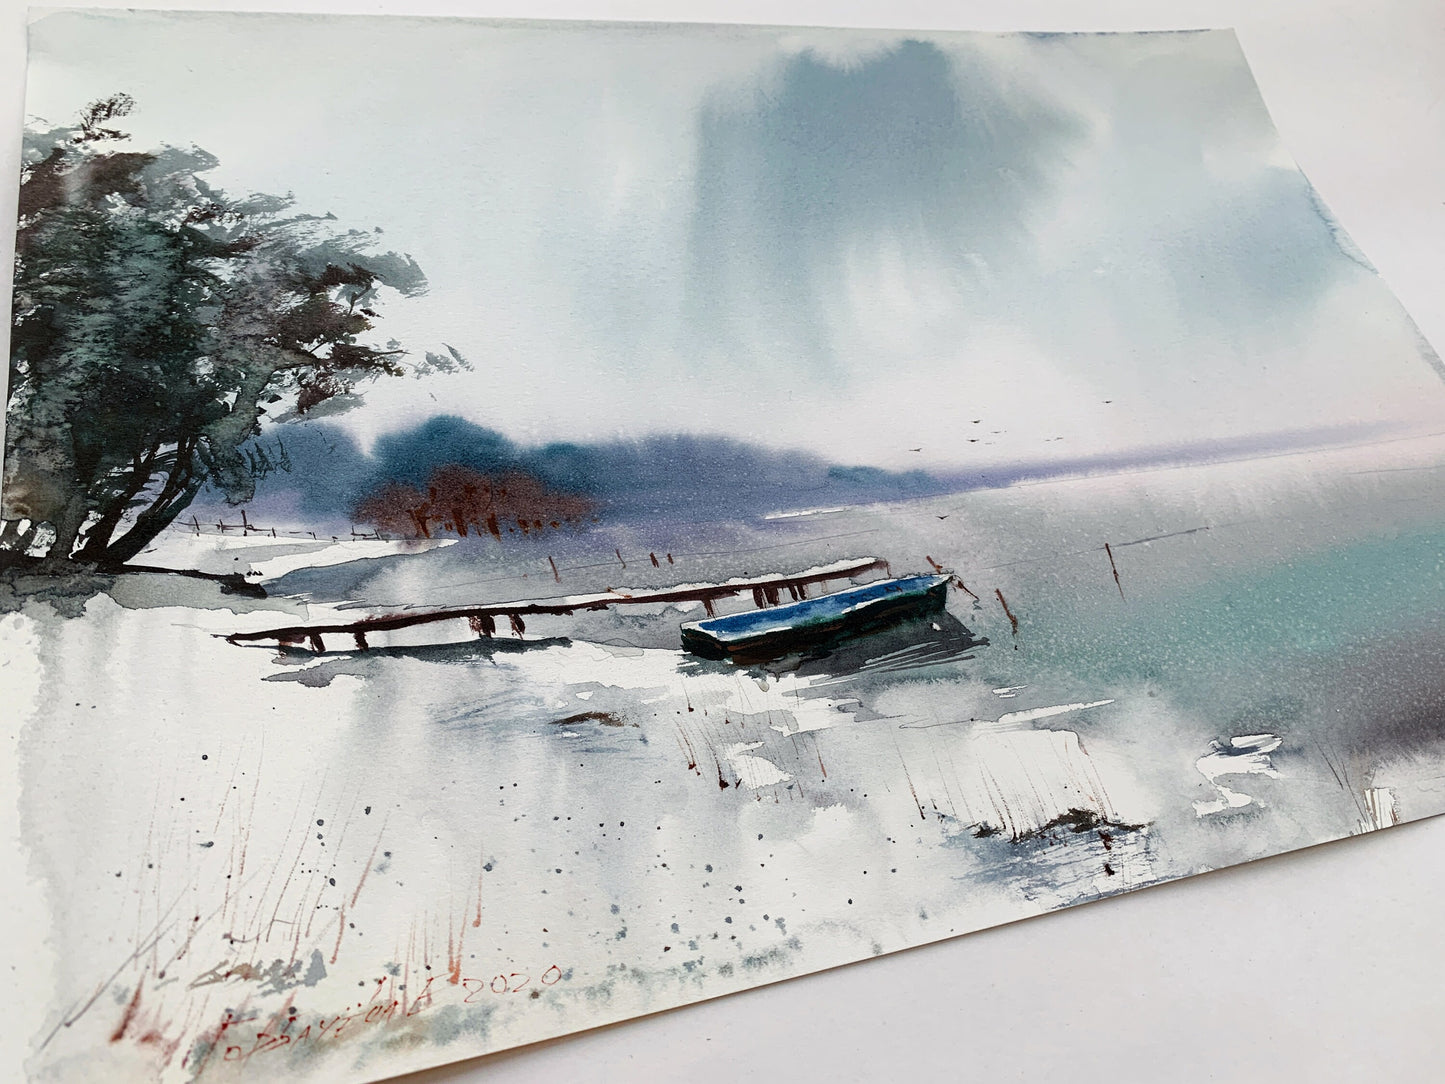 Lake Boat Painting Watercolor Original, Snow Landscape Wall Art, Nature House Wall Decor, Grey, Turquoise, Trees, Pier